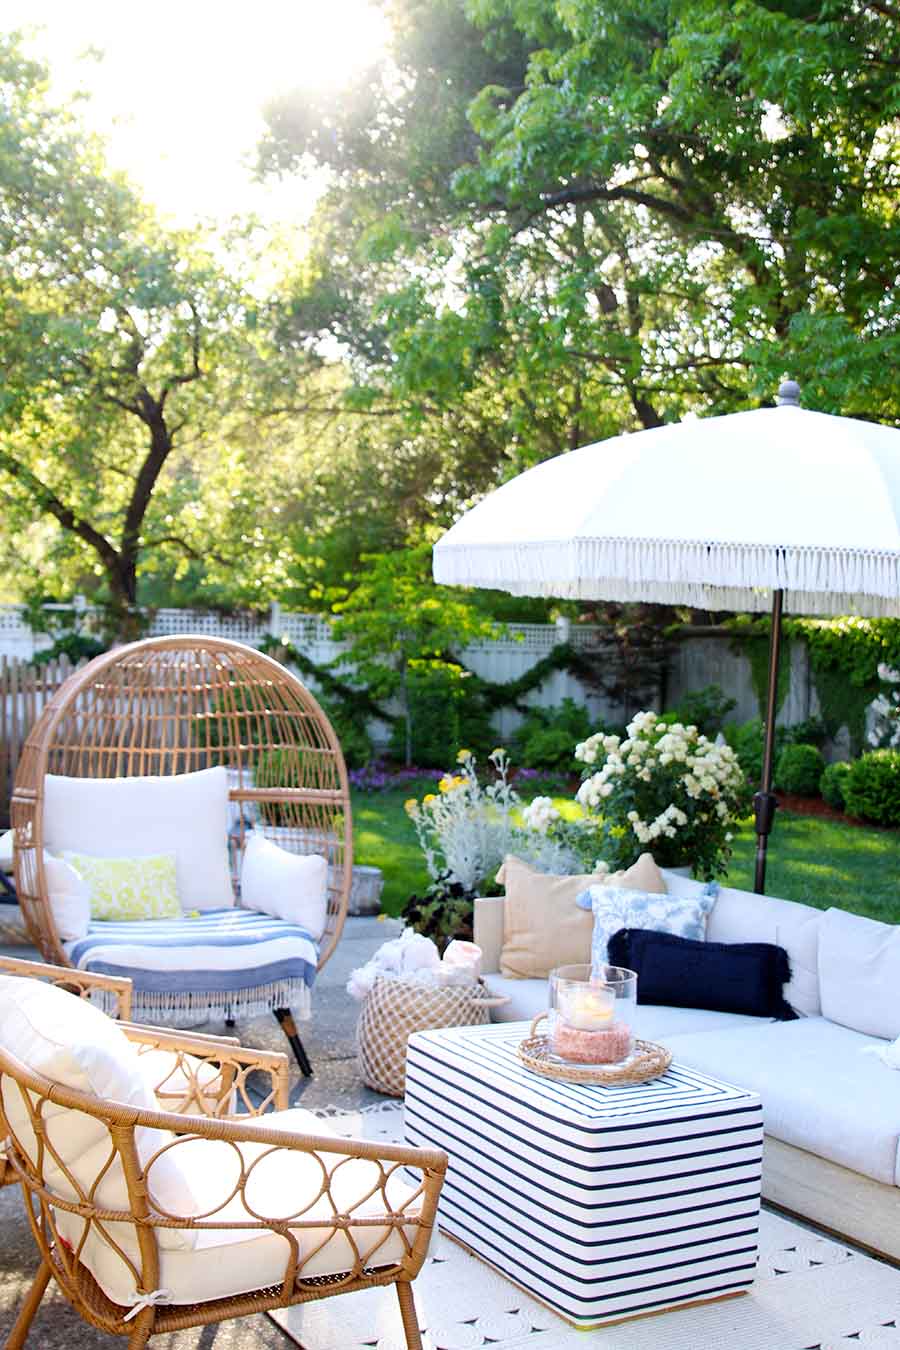 This Easy Summer Decorating Ideas post provides some easy inspirations that you can try at home. Make sure to create a cozy outdoor living space this year. Peek into some of our homes and see the easy things we add. Learn how to get your home ready for the lazy days of summer. #summerdecor #decorating #summerhome 